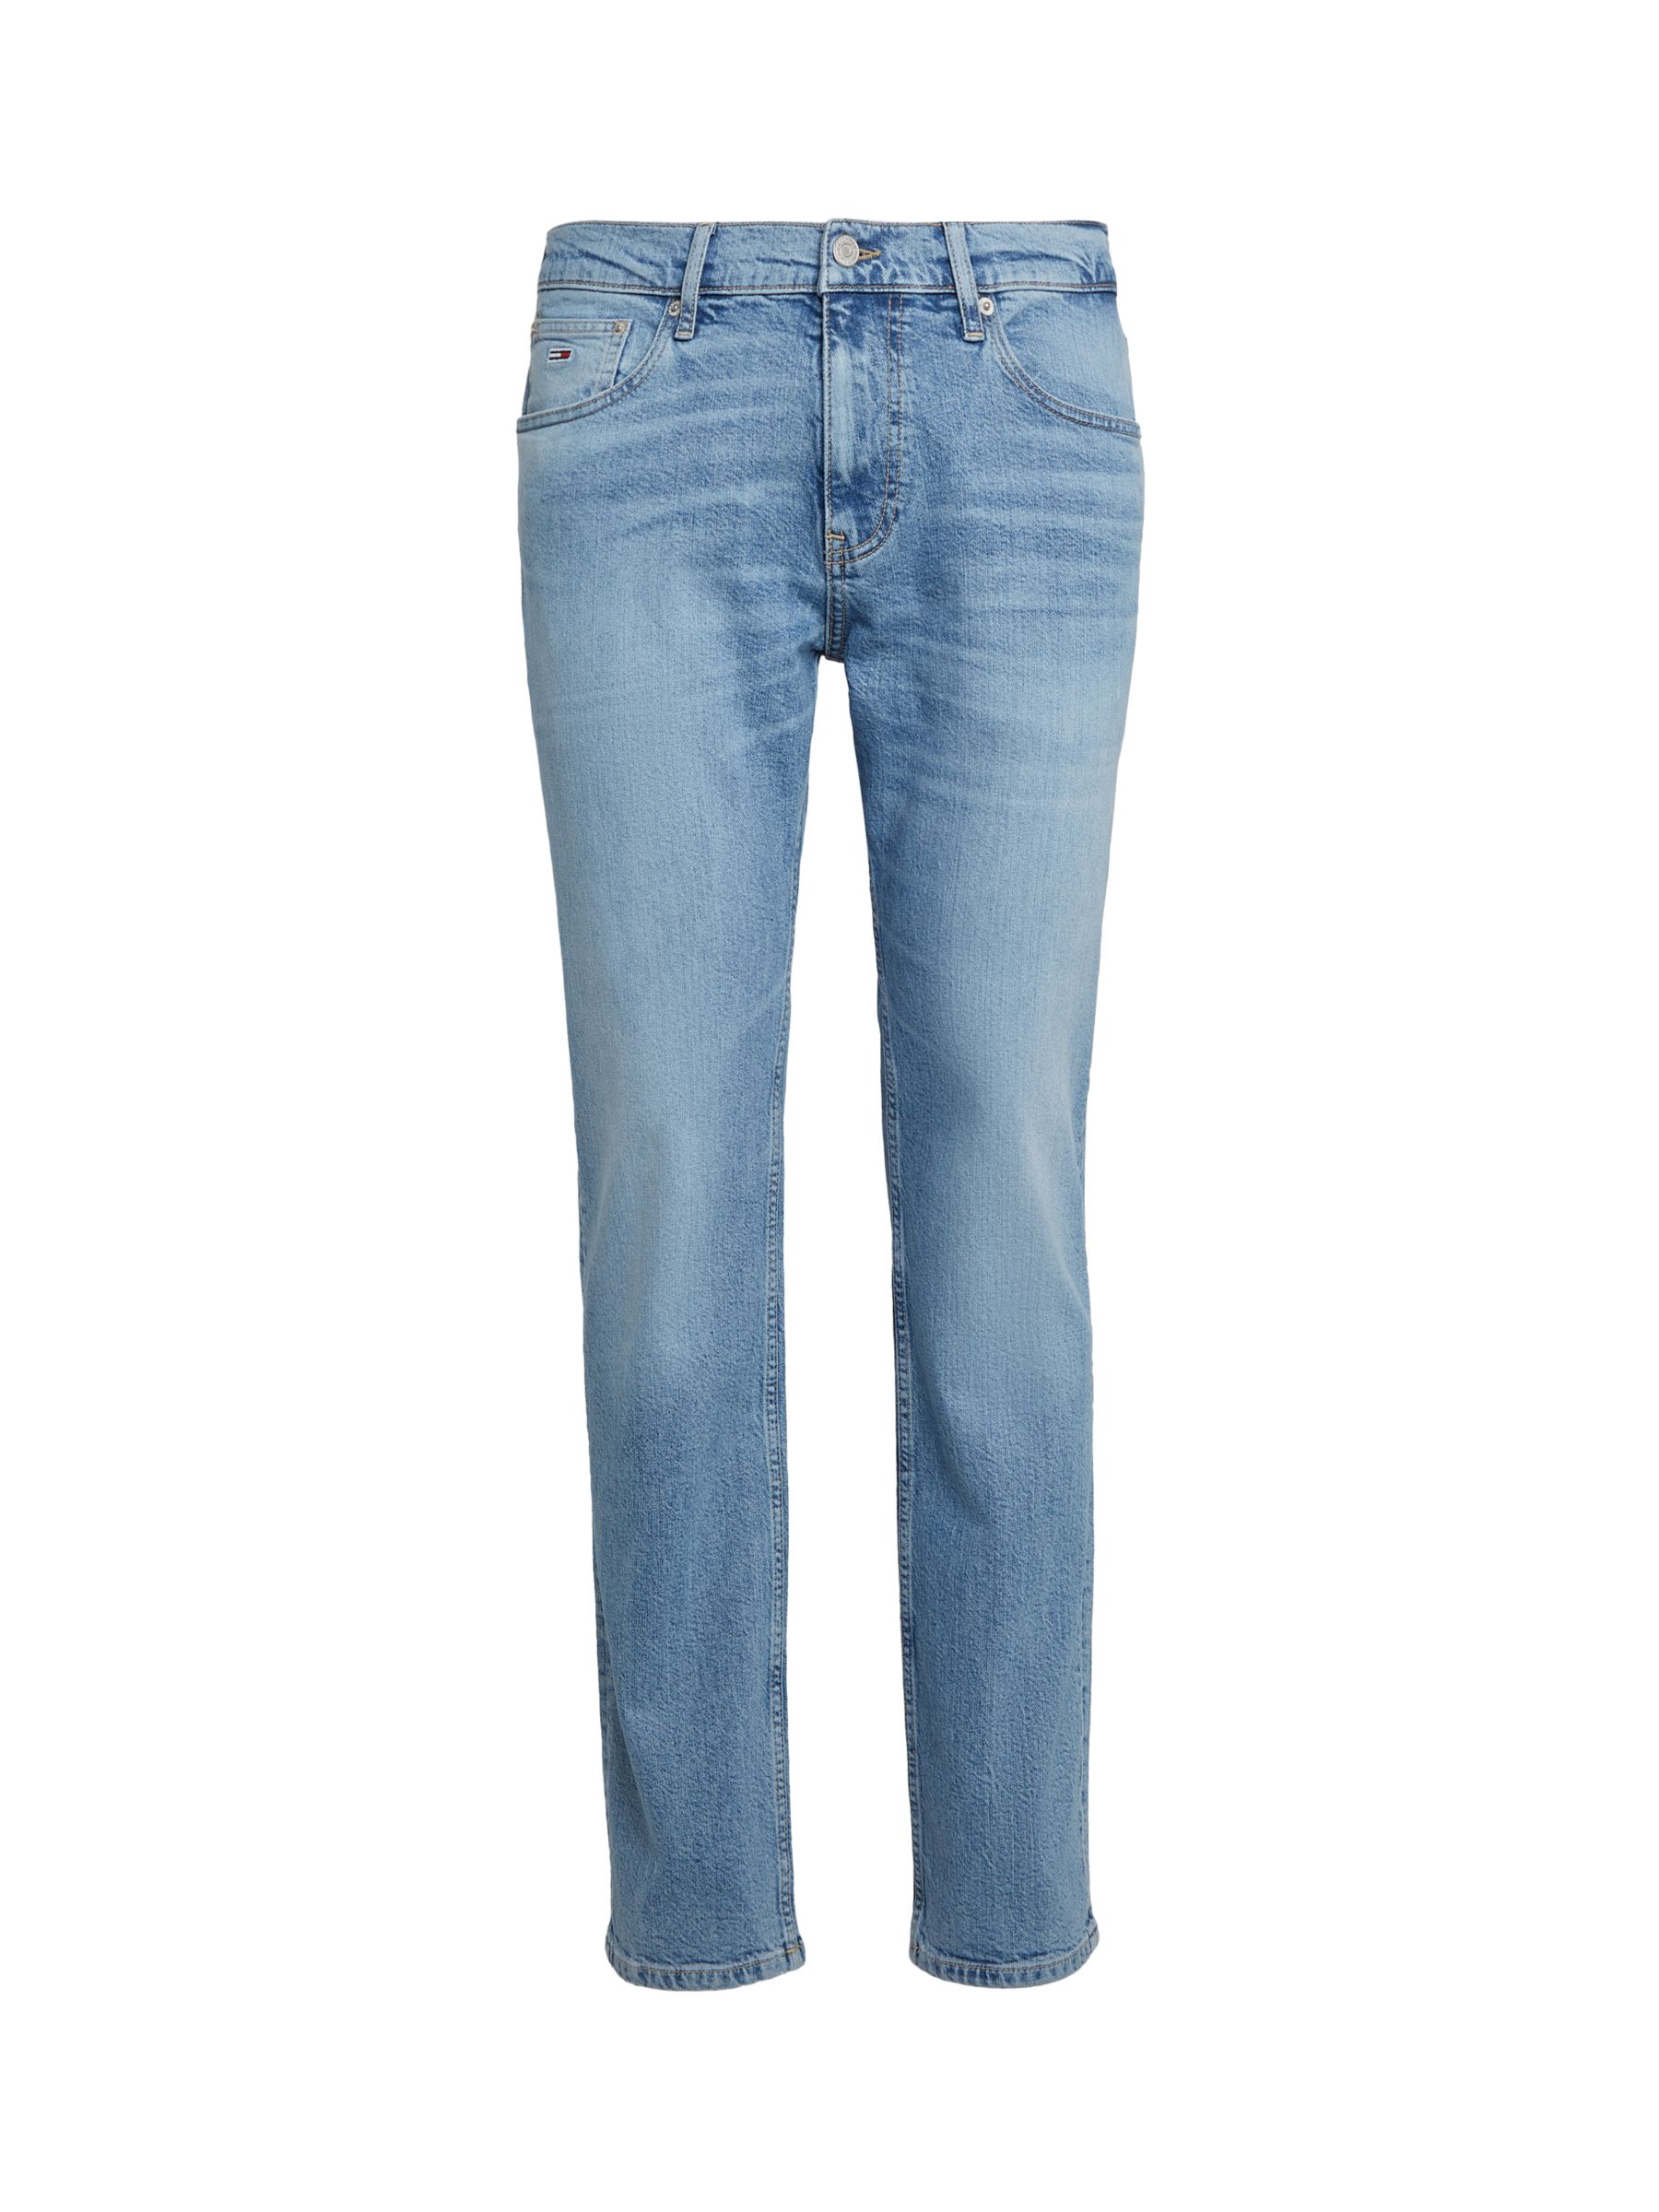 Buy Tommy Jeans Ryan Regular Straight Jeans Online at johnlewis.com